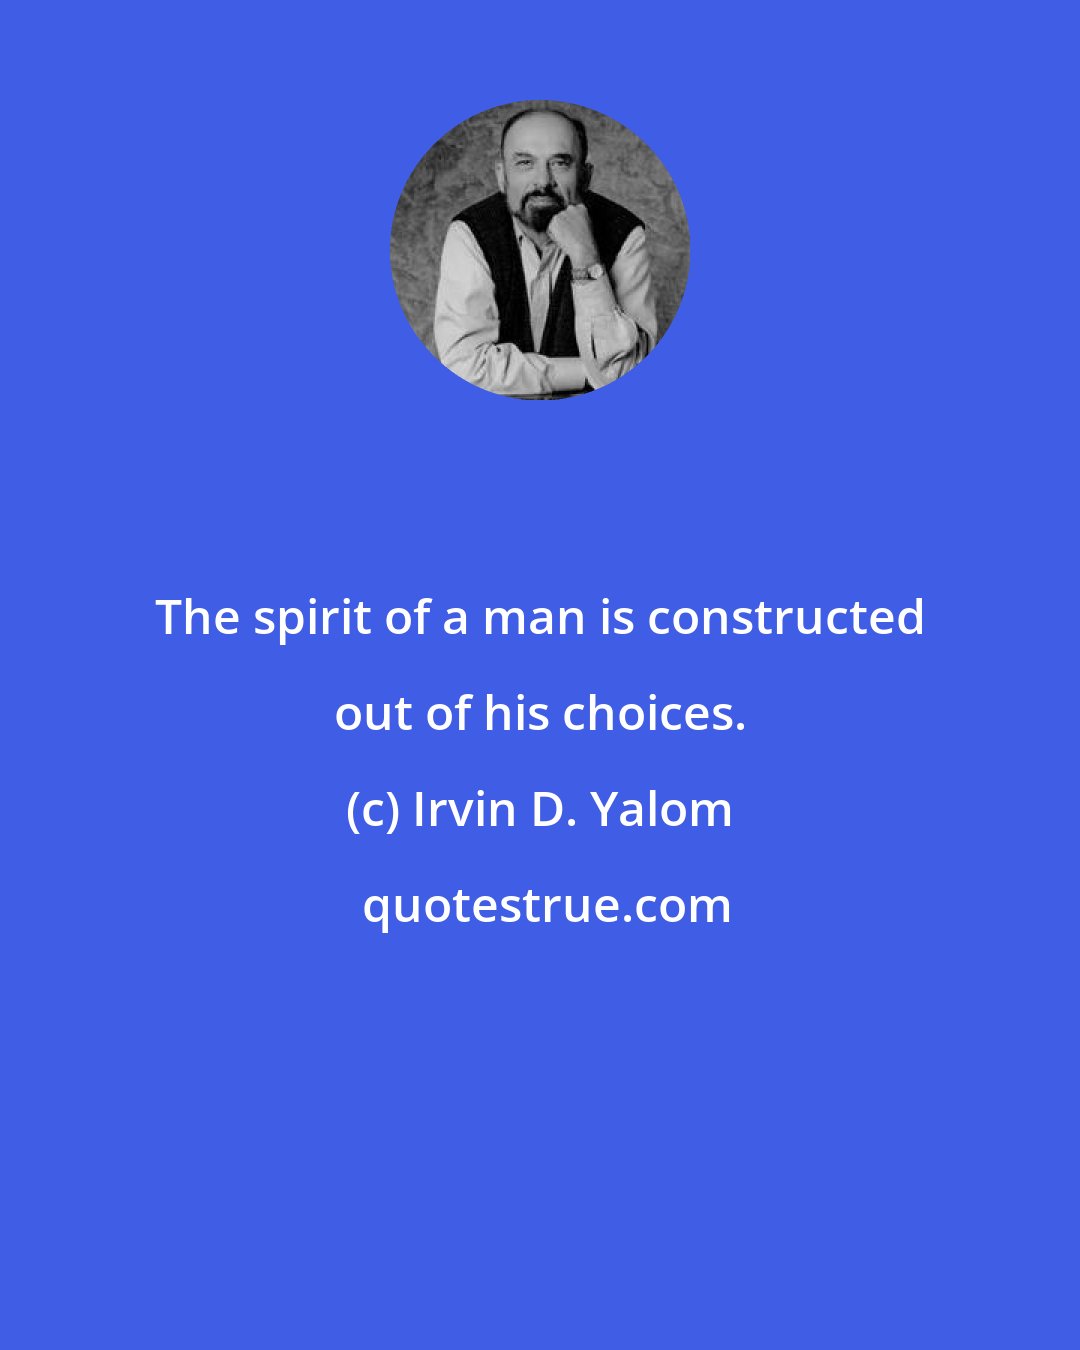 Irvin D. Yalom: The spirit of a man is constructed out of his choices.